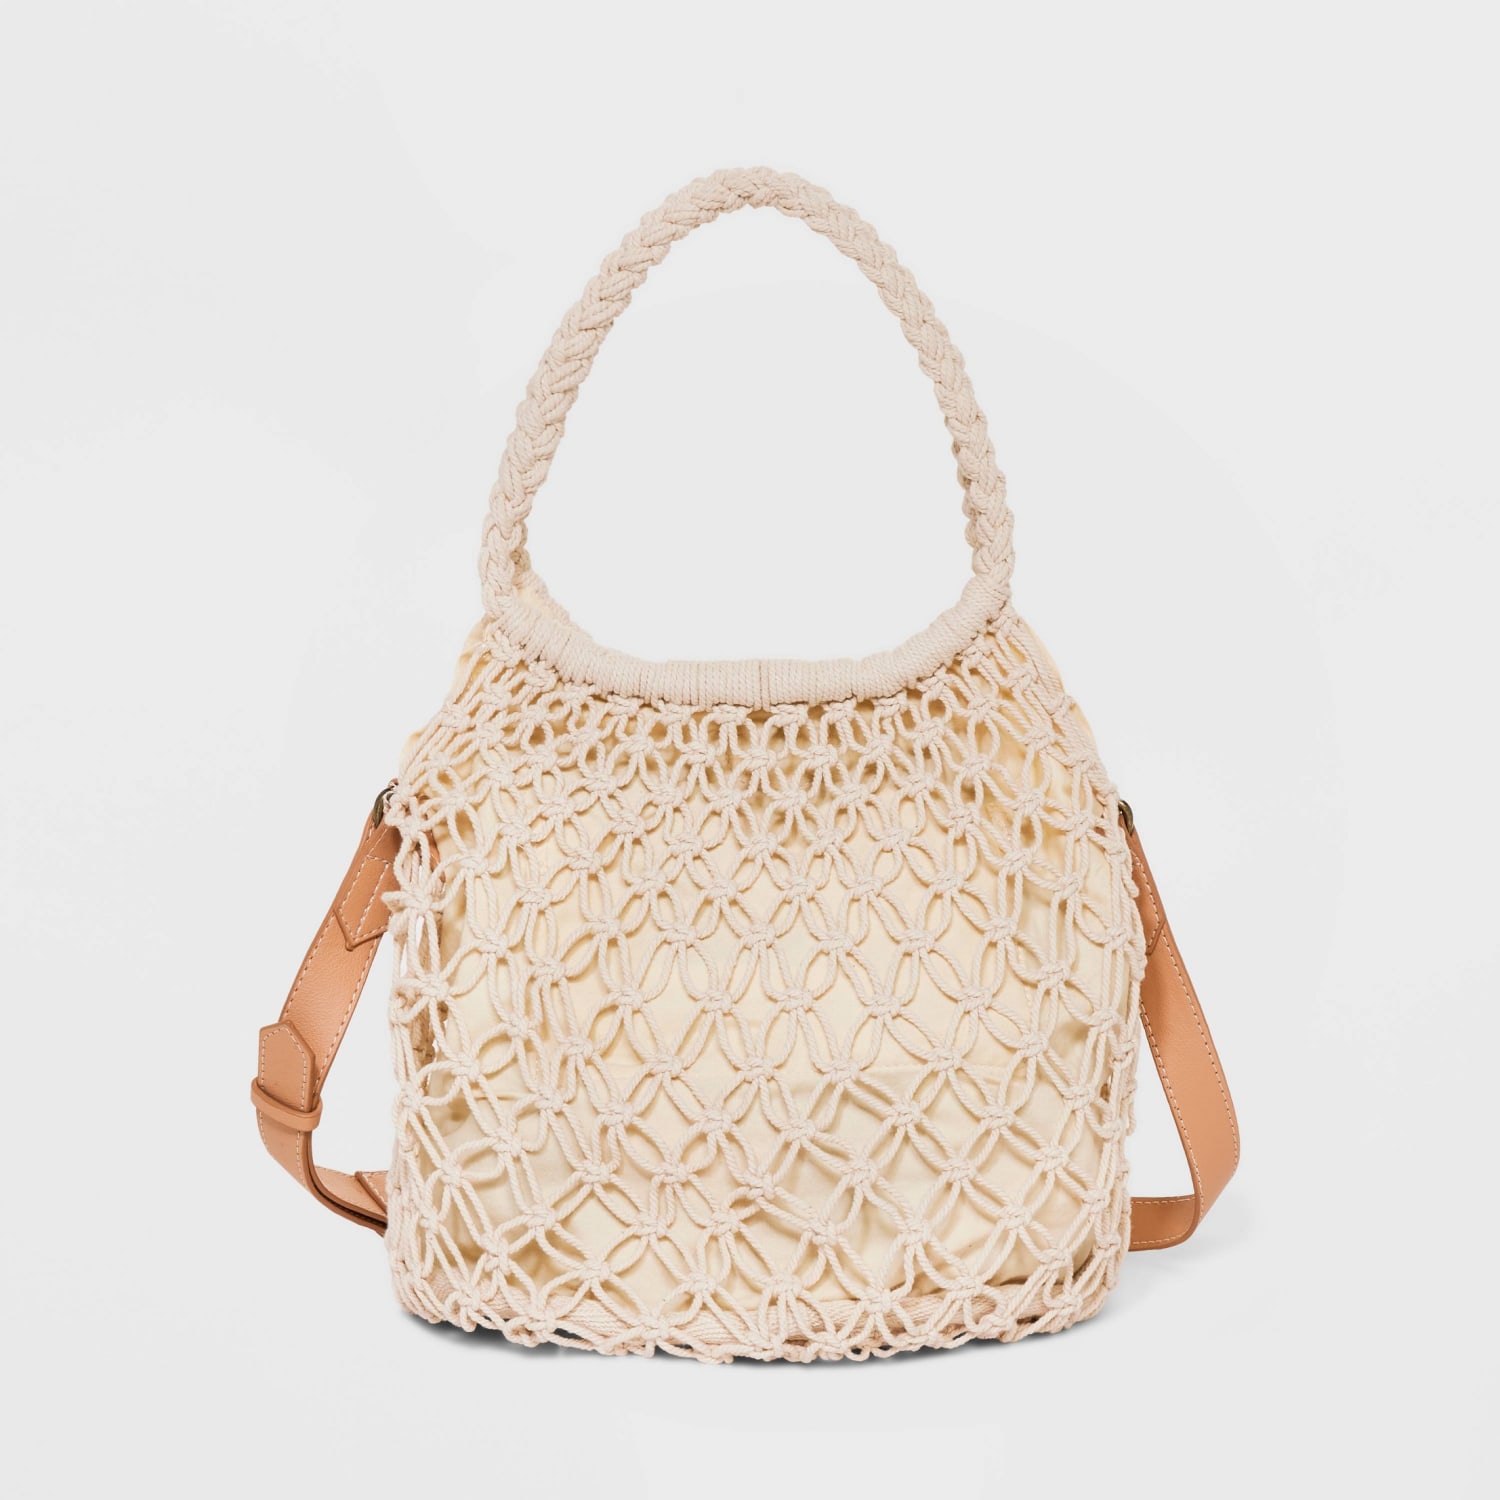 Straw Bags For Women 2021 Summer Casual Woven Crossbody Shoulder